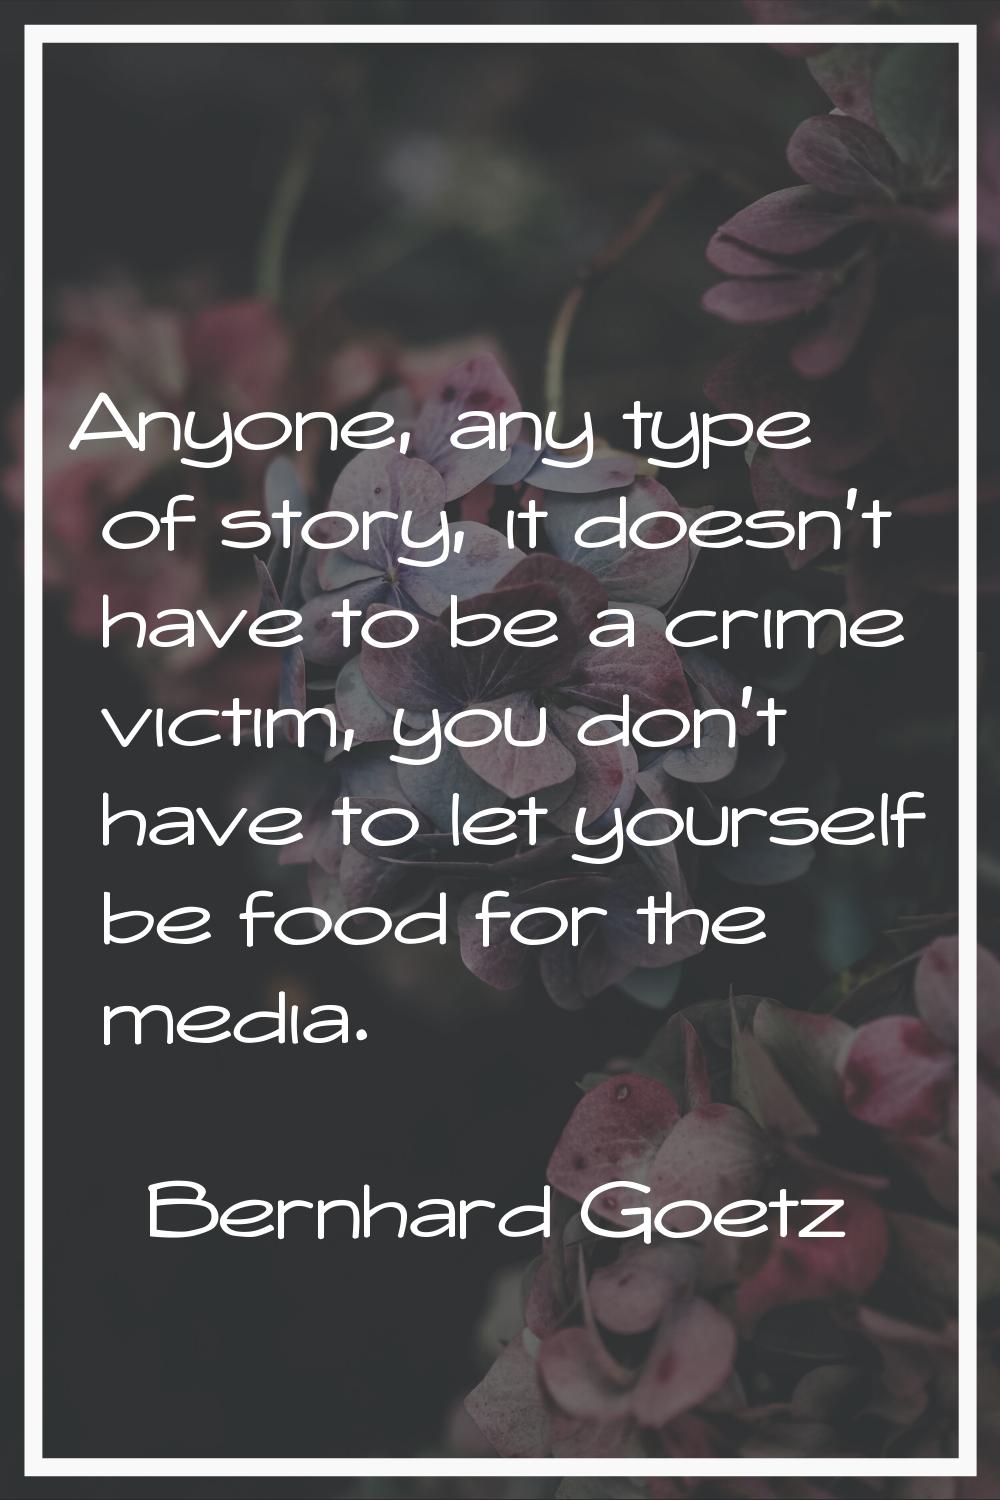 Anyone, any type of story, it doesn't have to be a crime victim, you don't have to let yourself be 